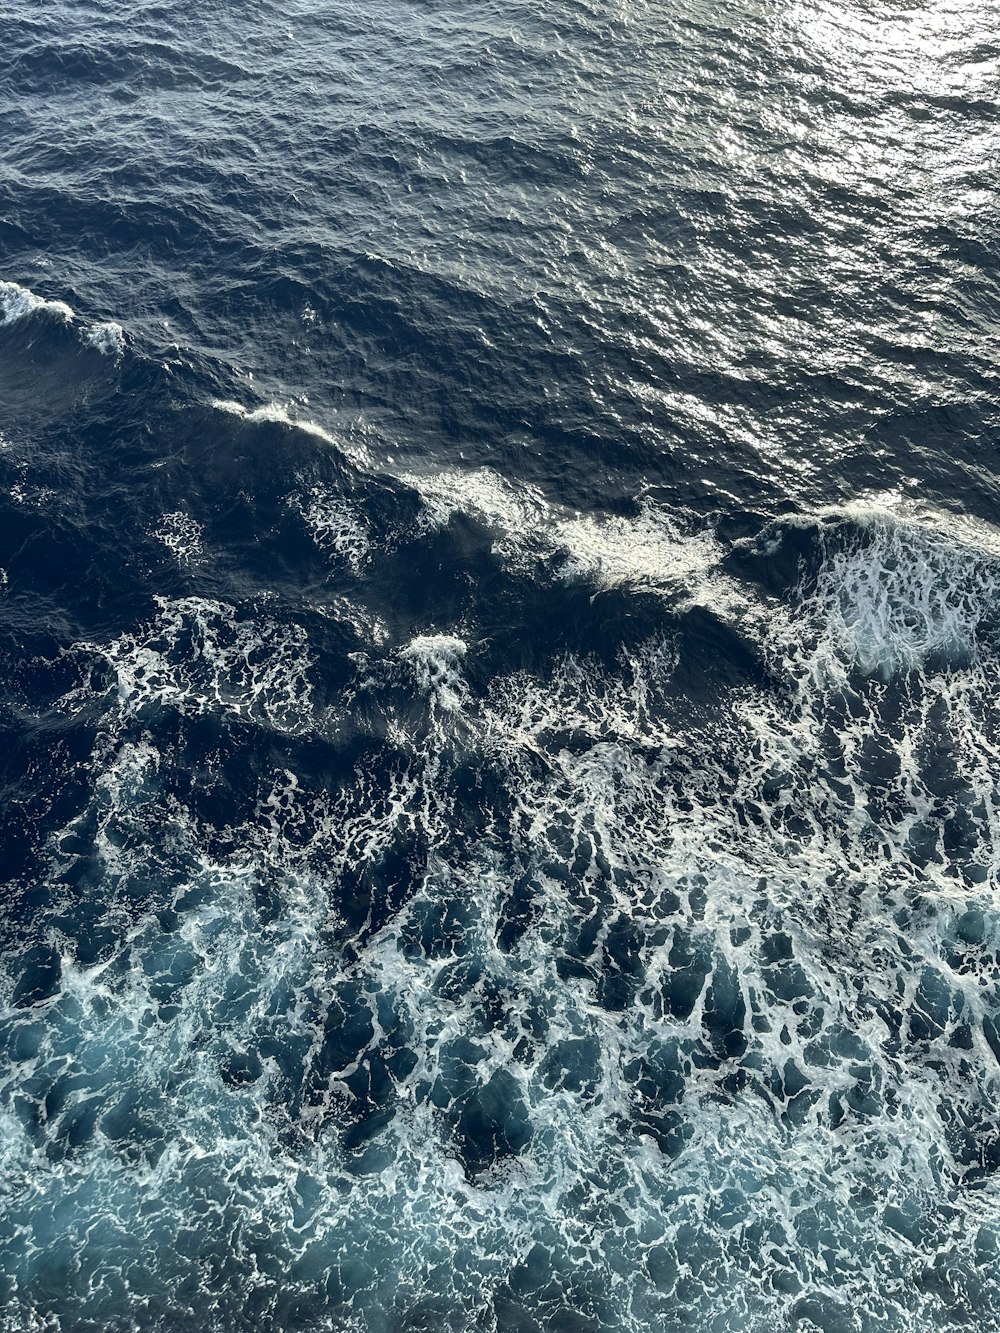 a view of the ocean from a boat